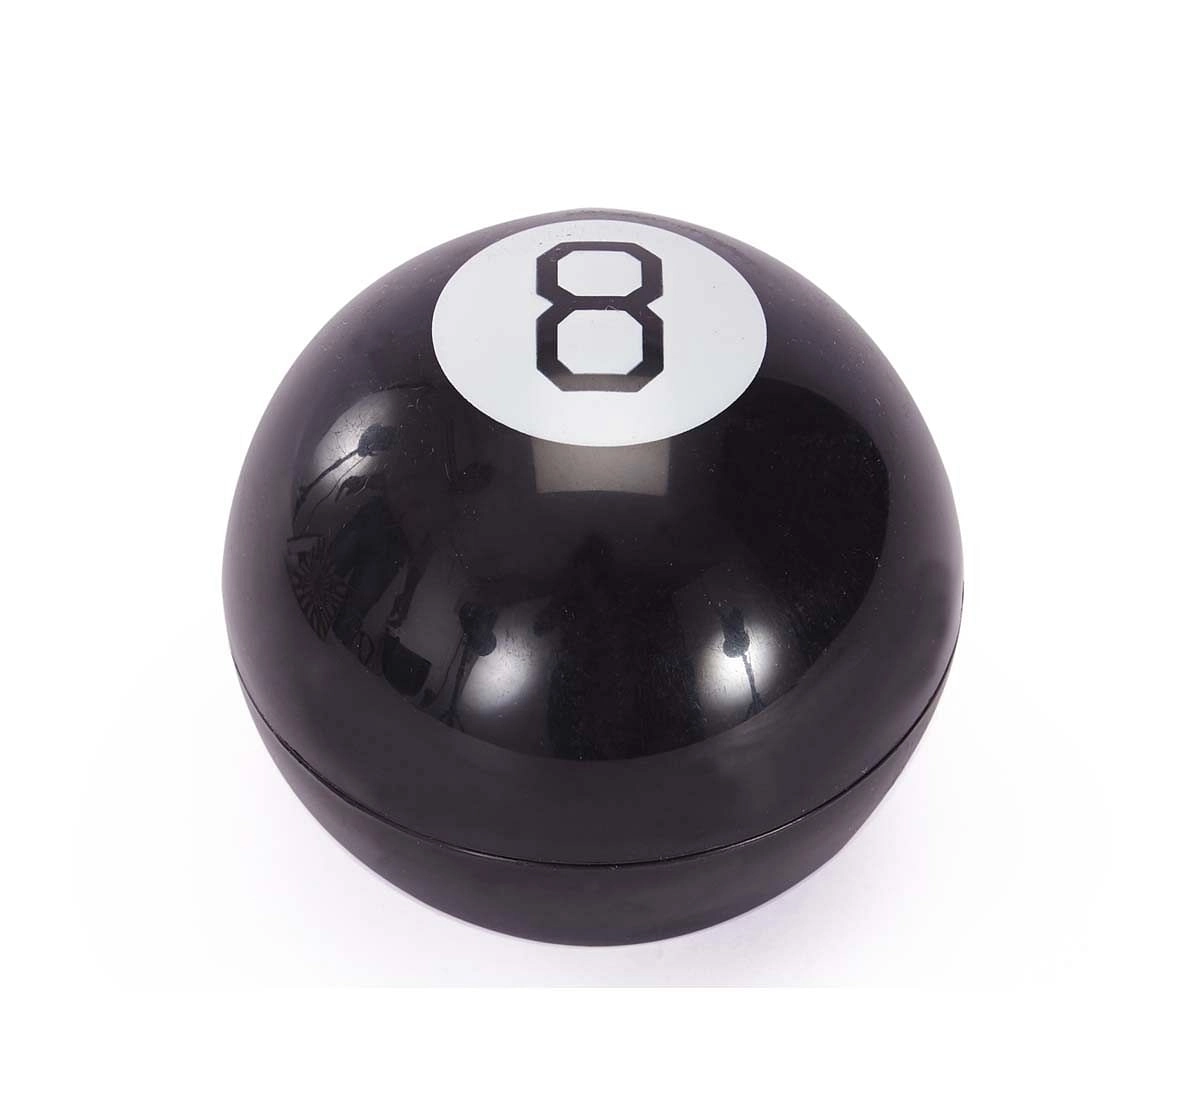 Red5 The Source Wholesale Black Mystic 8 Ball Impulse Toys for Kids age 3Y+